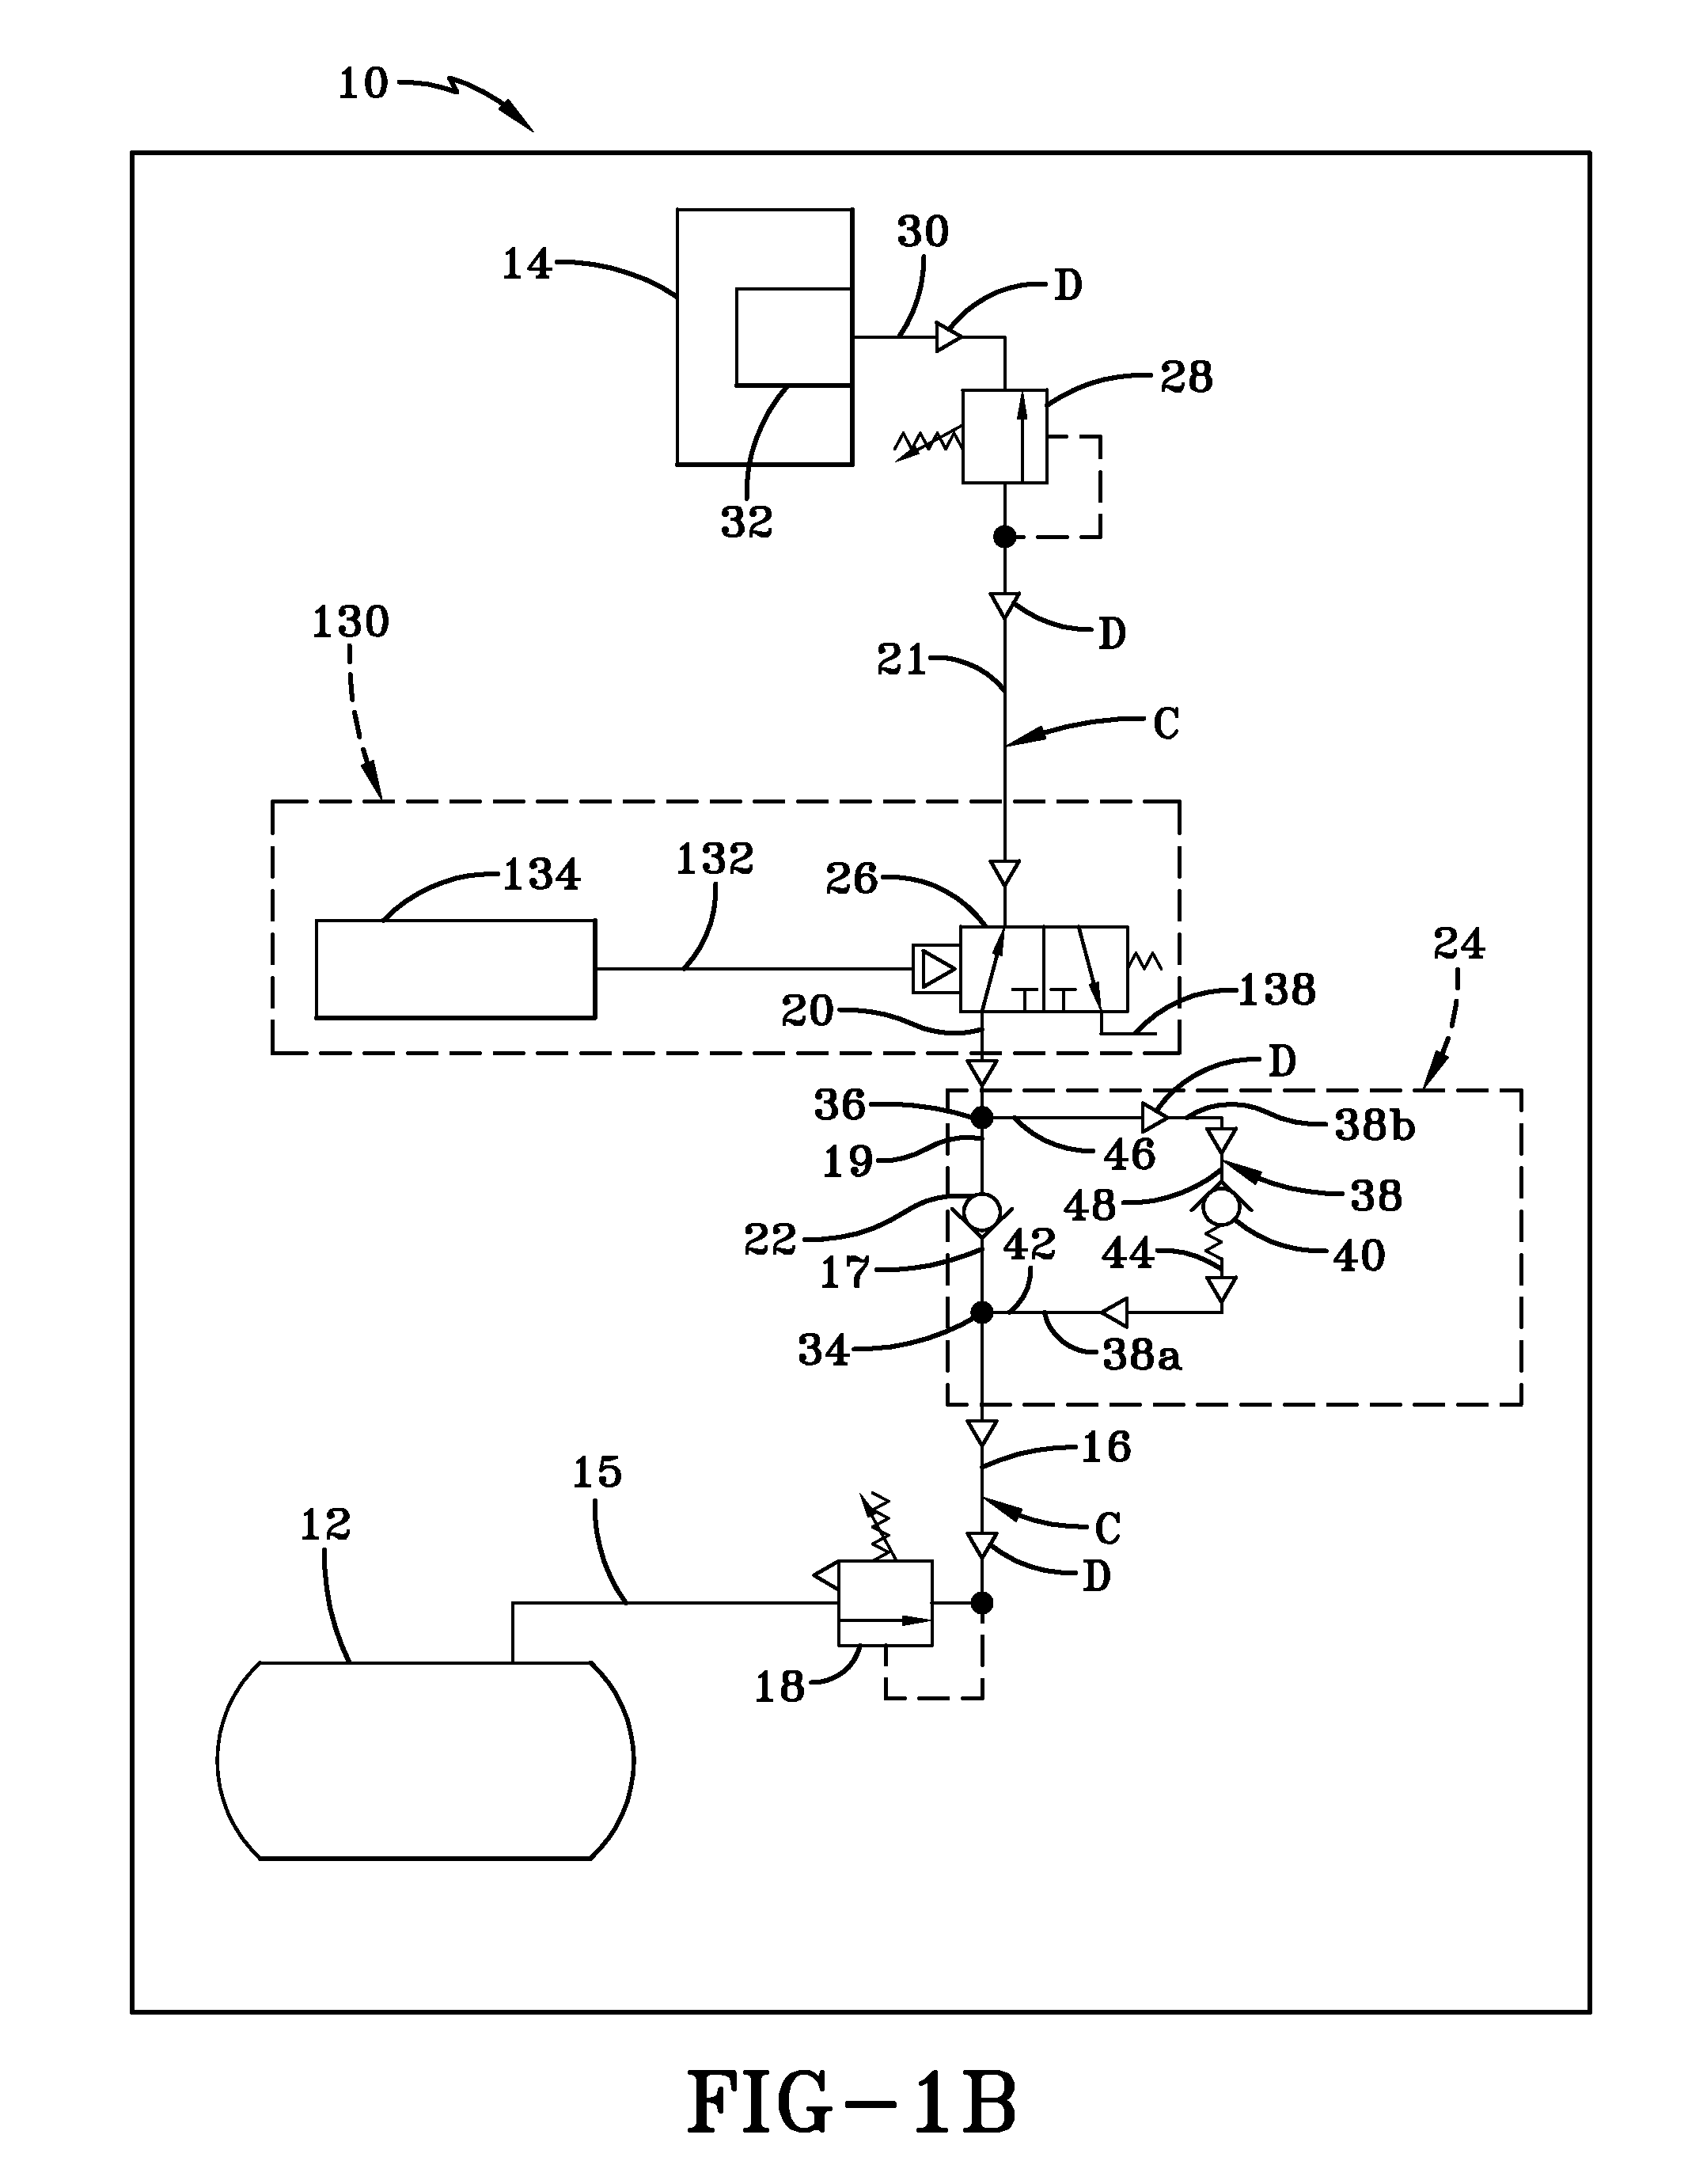 Tire inflation system with discrete deflation circuit